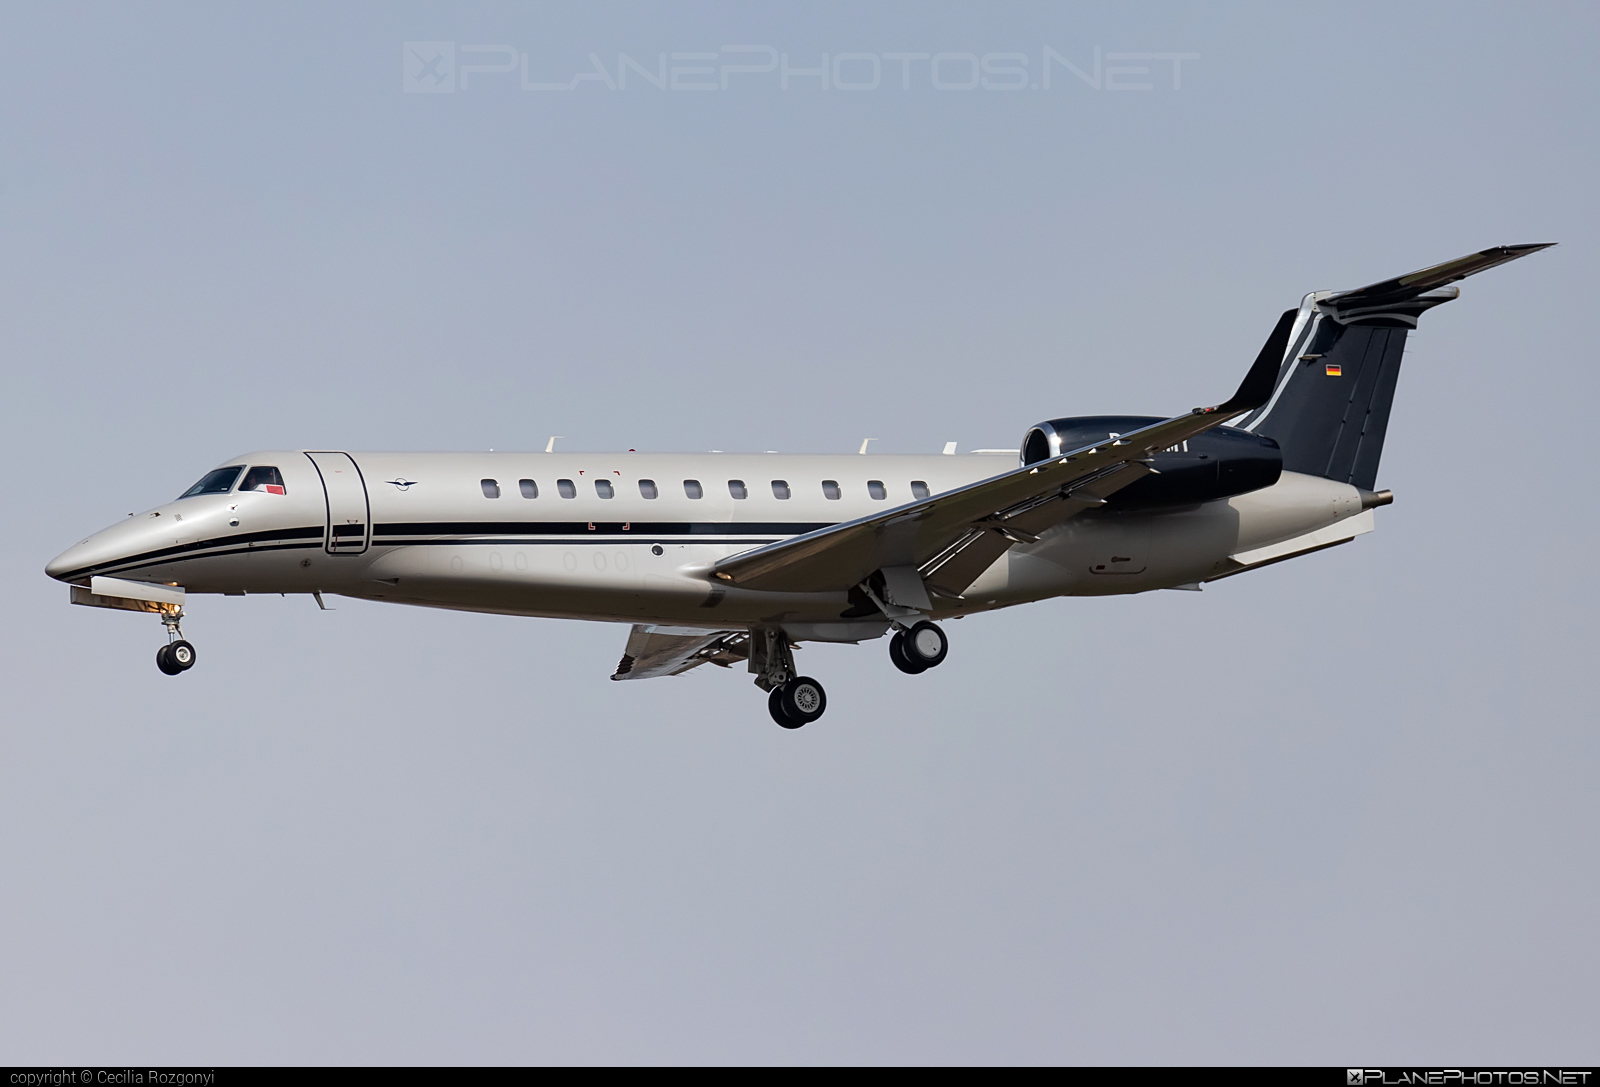 Embraer Legacy 650 (ERJ-135BJ) - D-ARMY operated by AIR HAMBURG #embraer #embraer135 #embraerlegacy #erj135 #erj135bj #legacy650